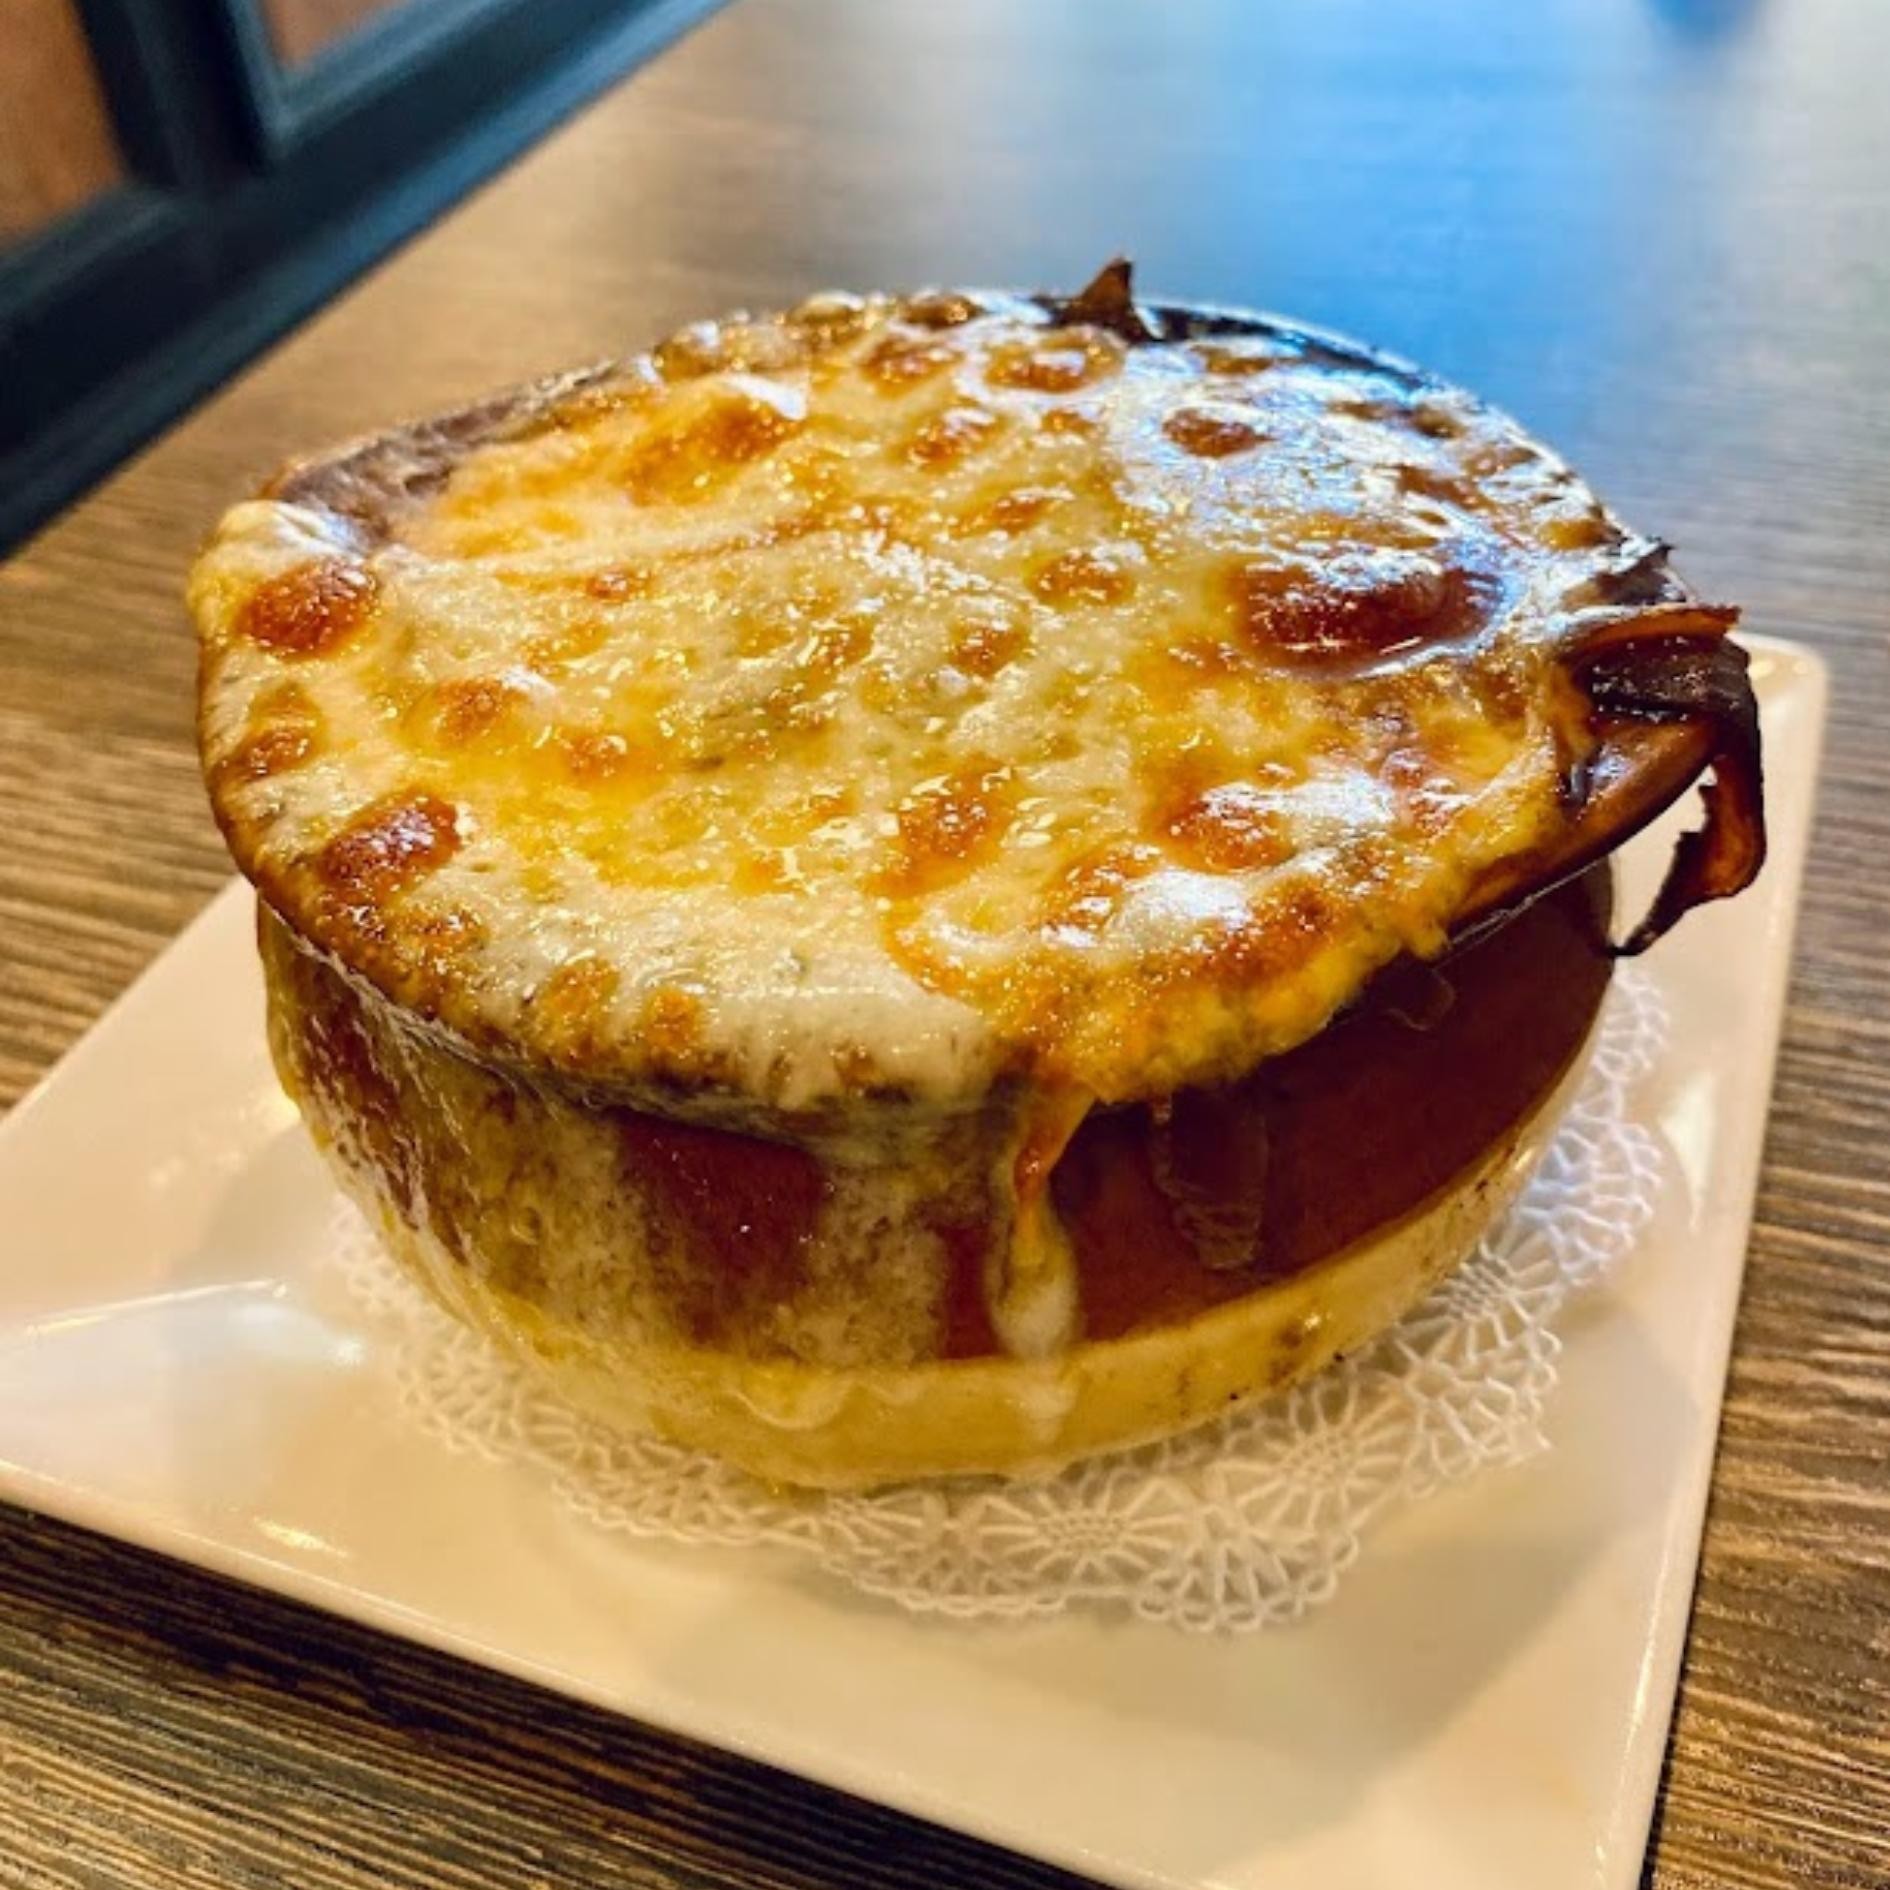 French Onion Soup TO GO